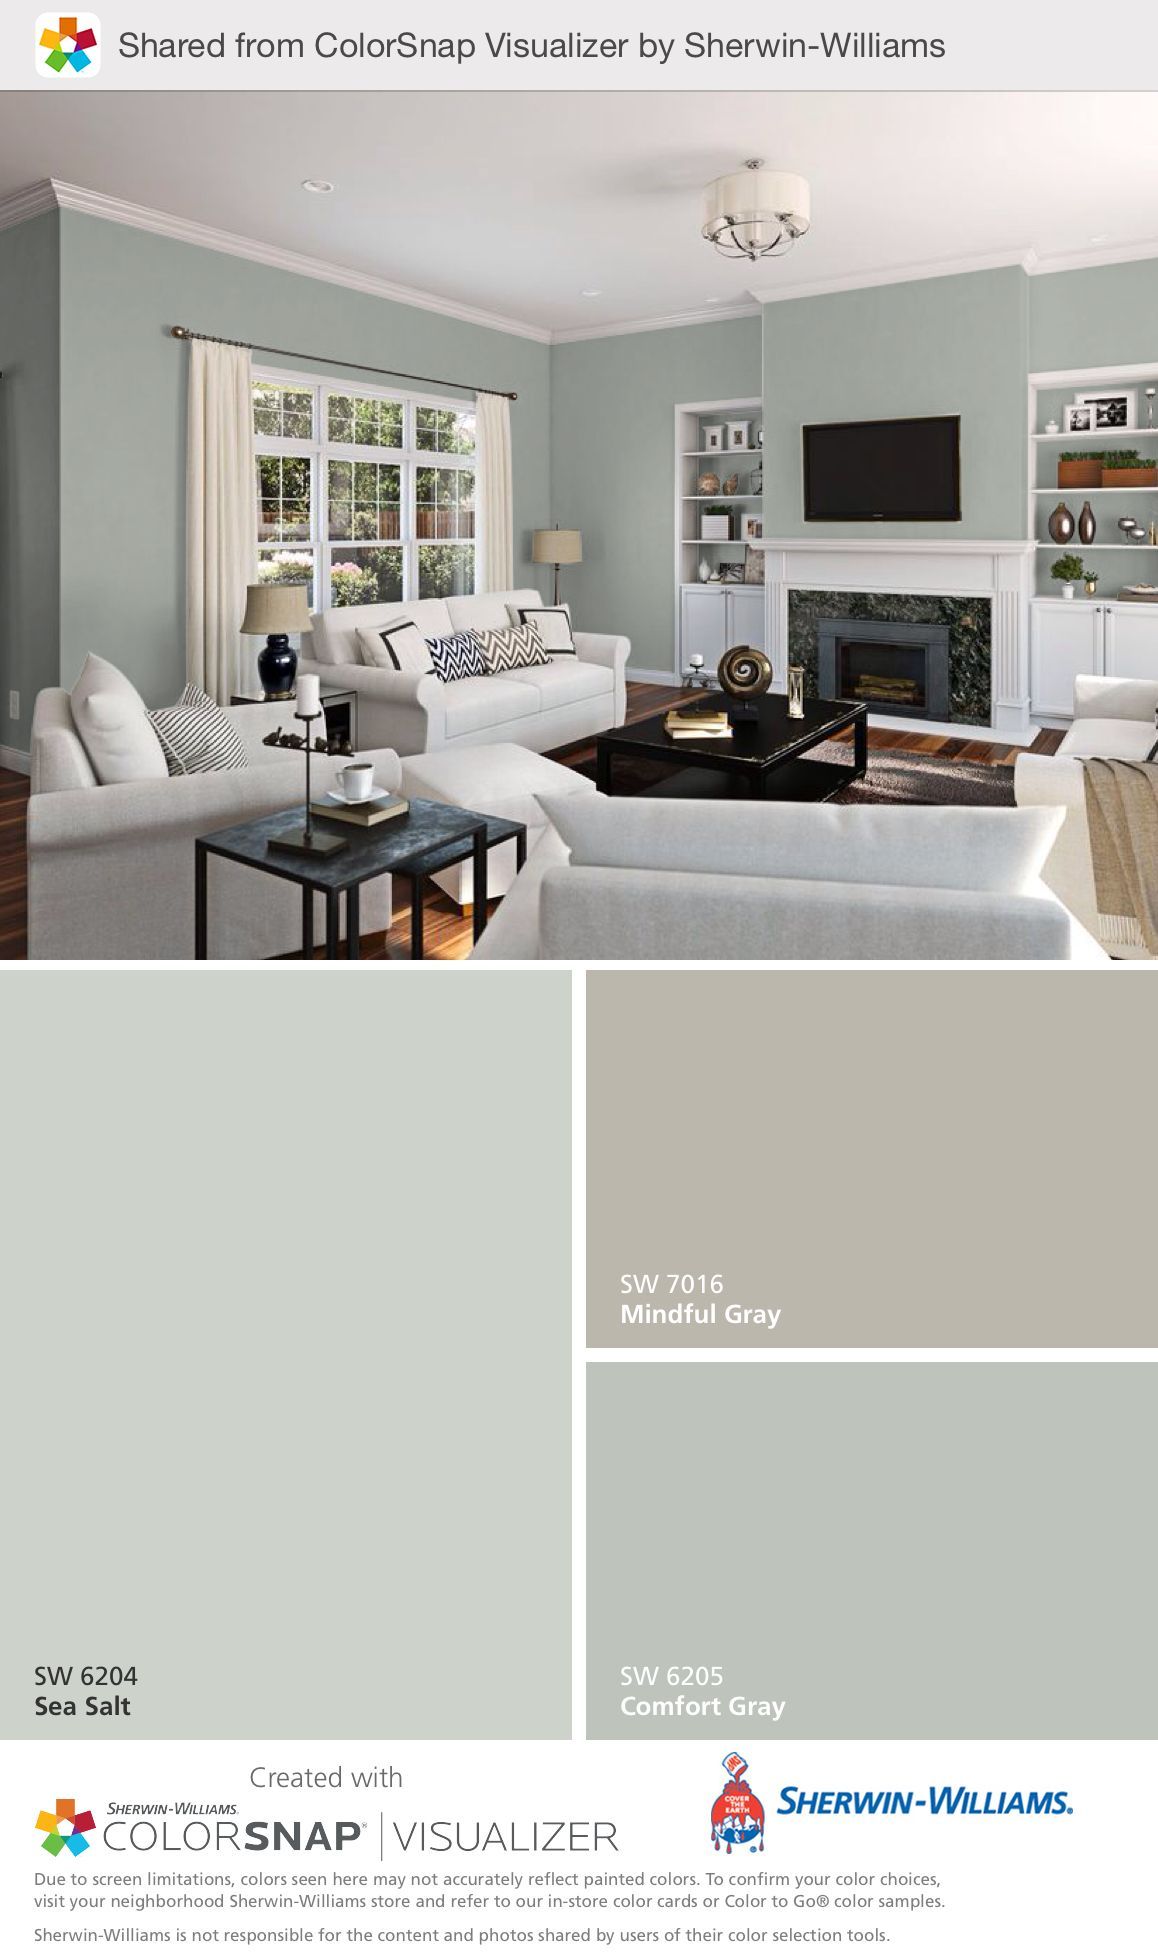 Sherwin Williams Comfort Gray (daylight) This color is absolutely beautiful in my living room and dining room.